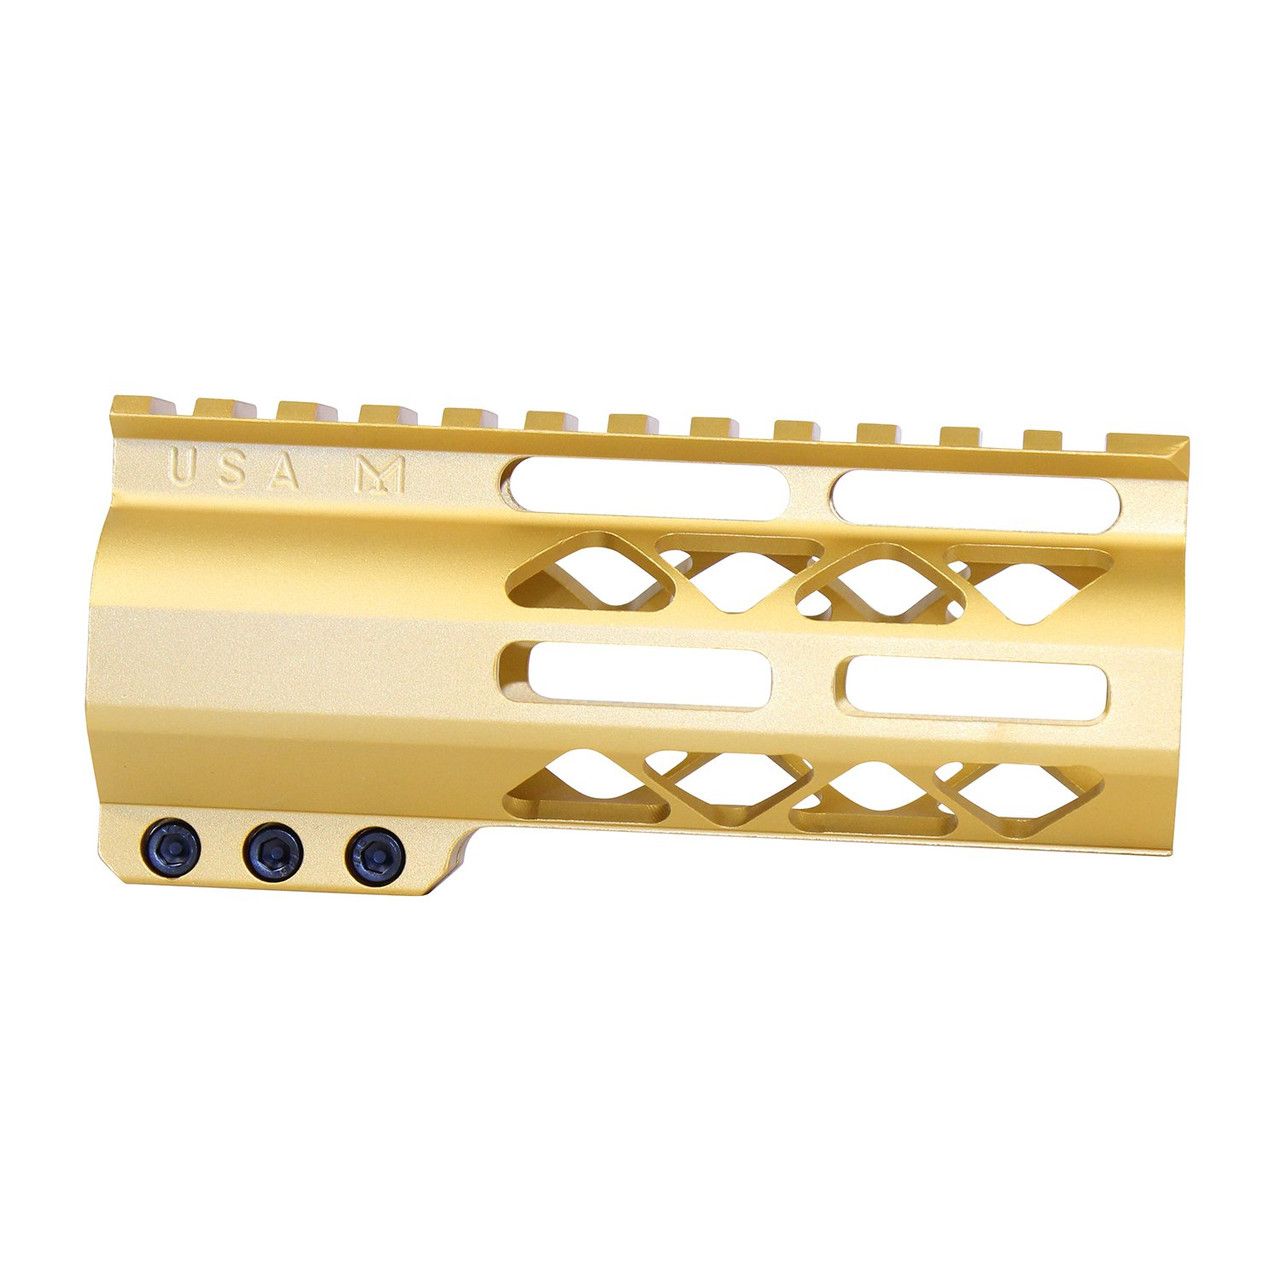 Guntec USA GT-5ALC-GOLD 5" AIR-LOK Series M-LOK Compression Free Floating Handguard With Monolithic Top Rail (Anodized Gold)